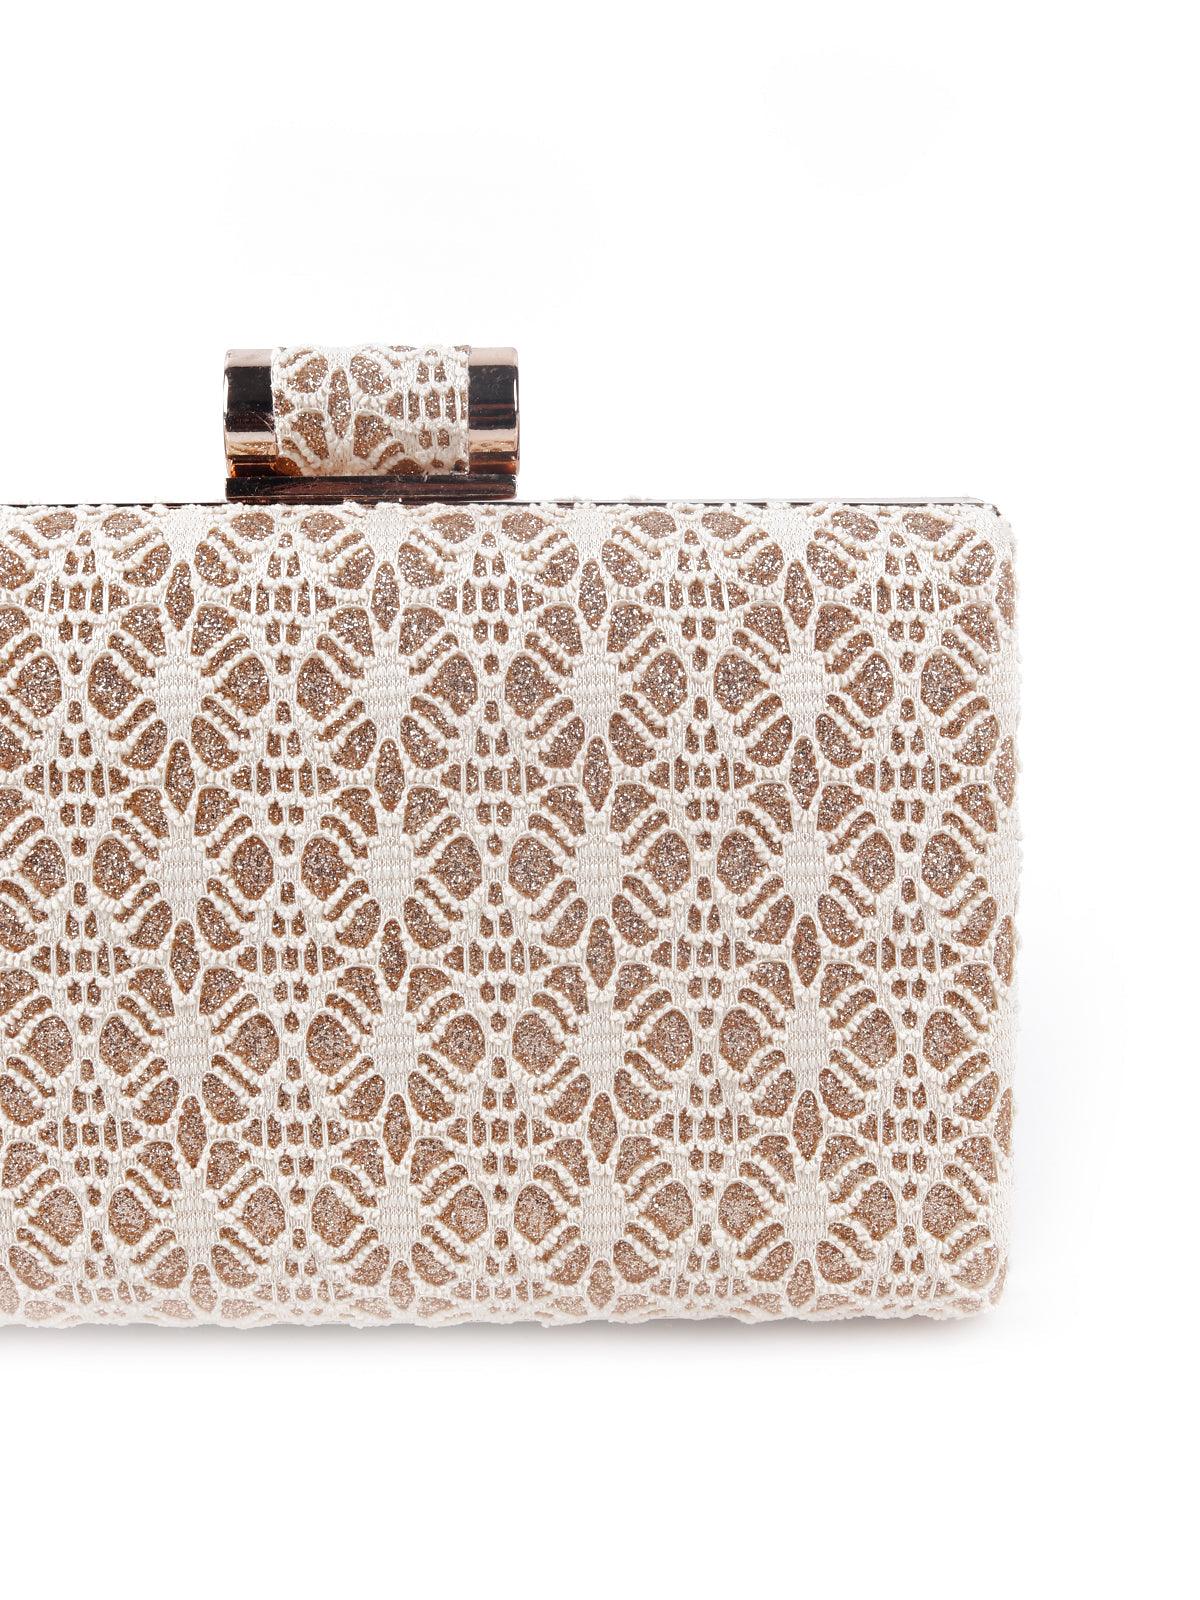 Classic white lace box sling bag for women - Odette